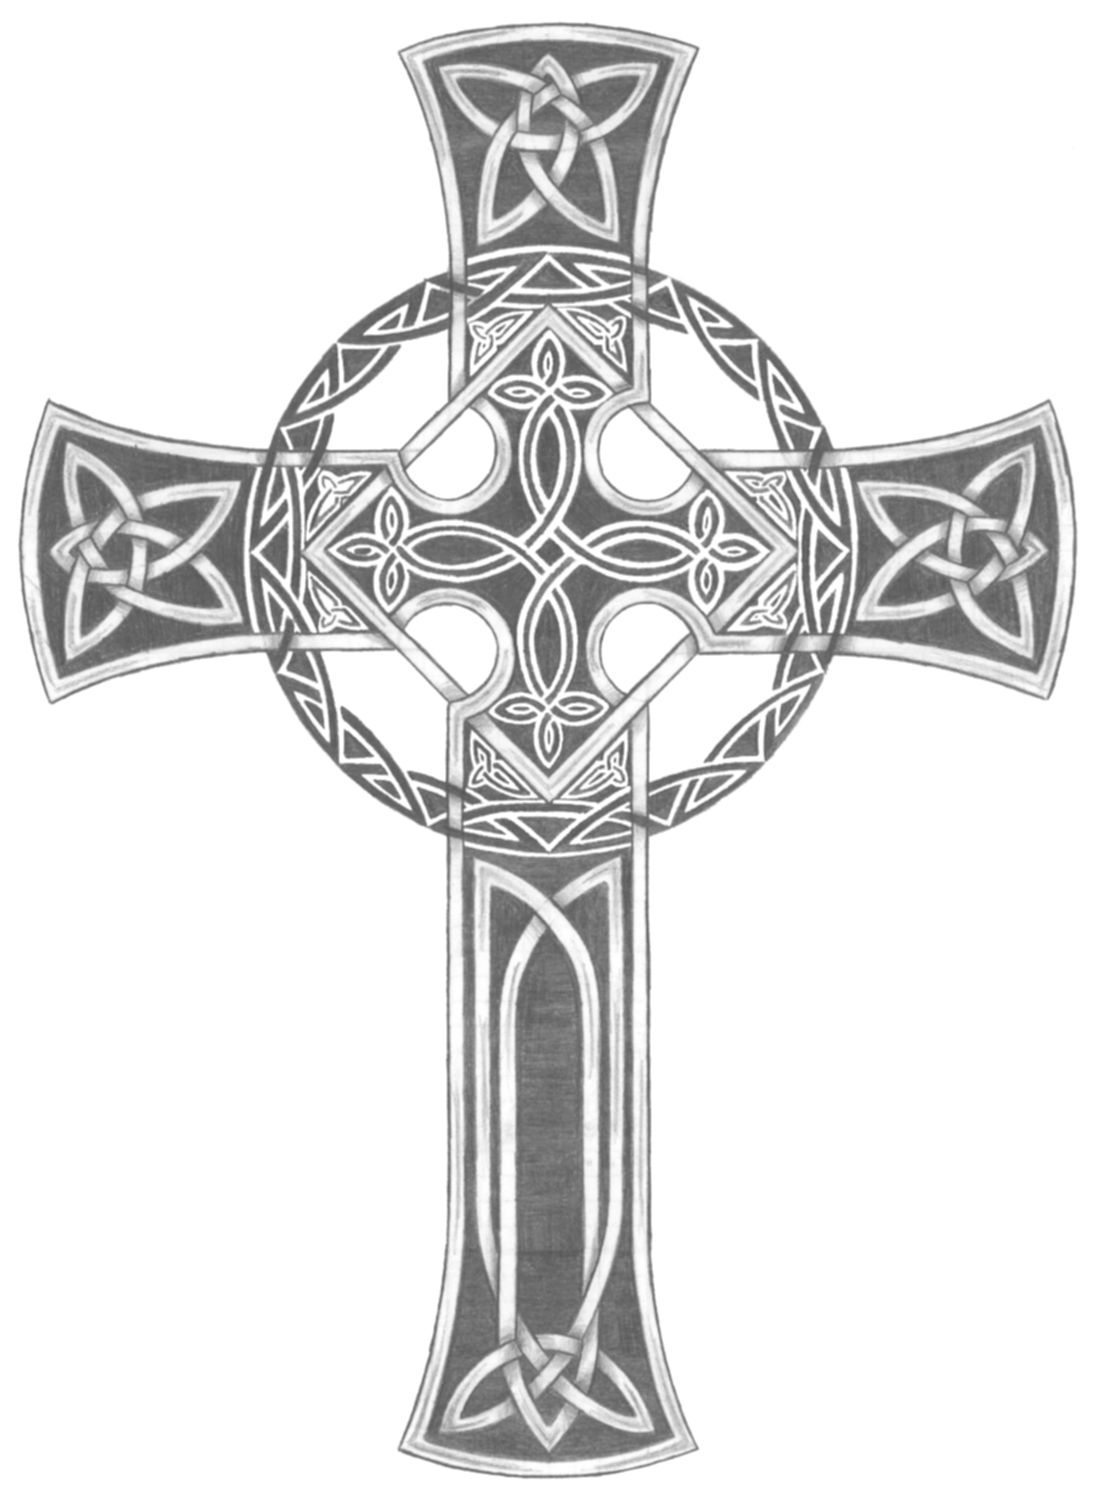 Black And Grey Celtic Cross Tattoo by Willsketch